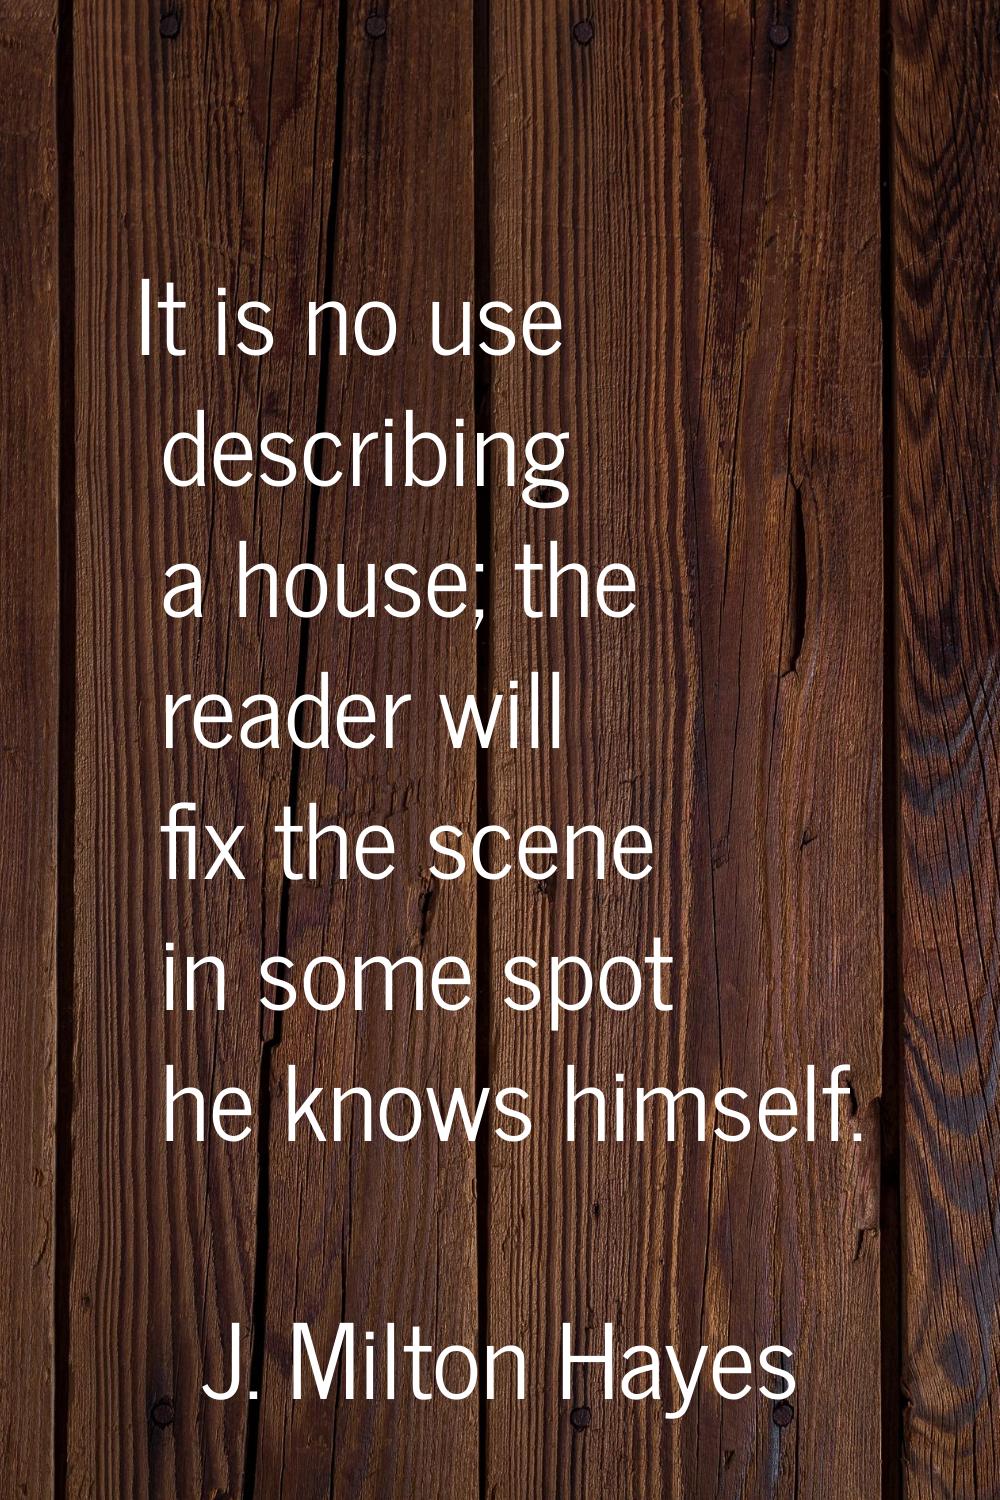 It is no use describing a house; the reader will fix the scene in some spot he knows himself.